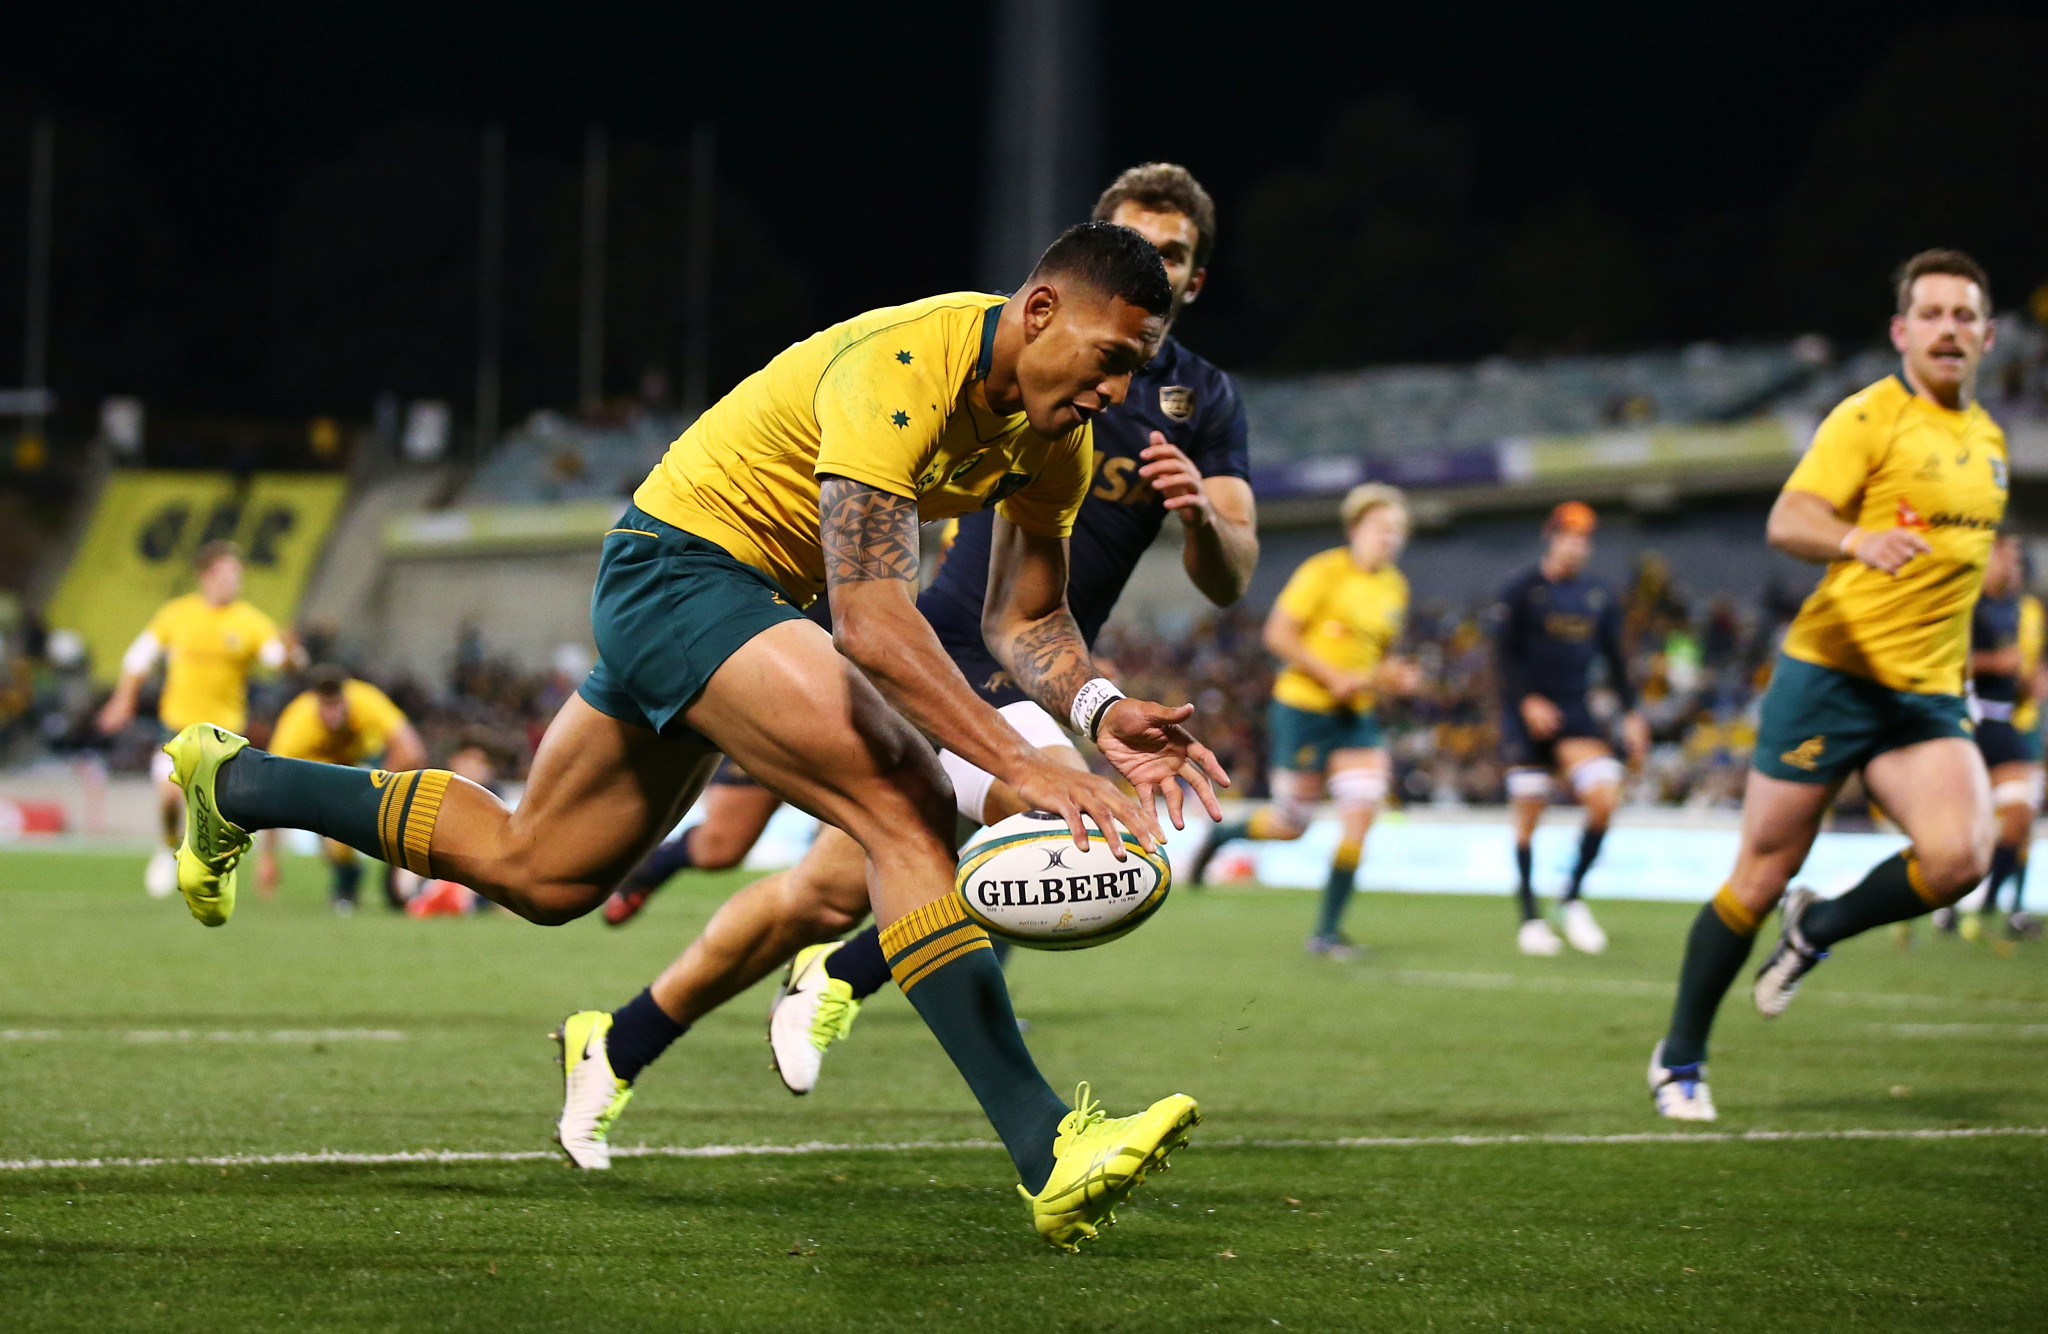 Israel Folau was one of Australia's key players before his sacking ©Getty Images